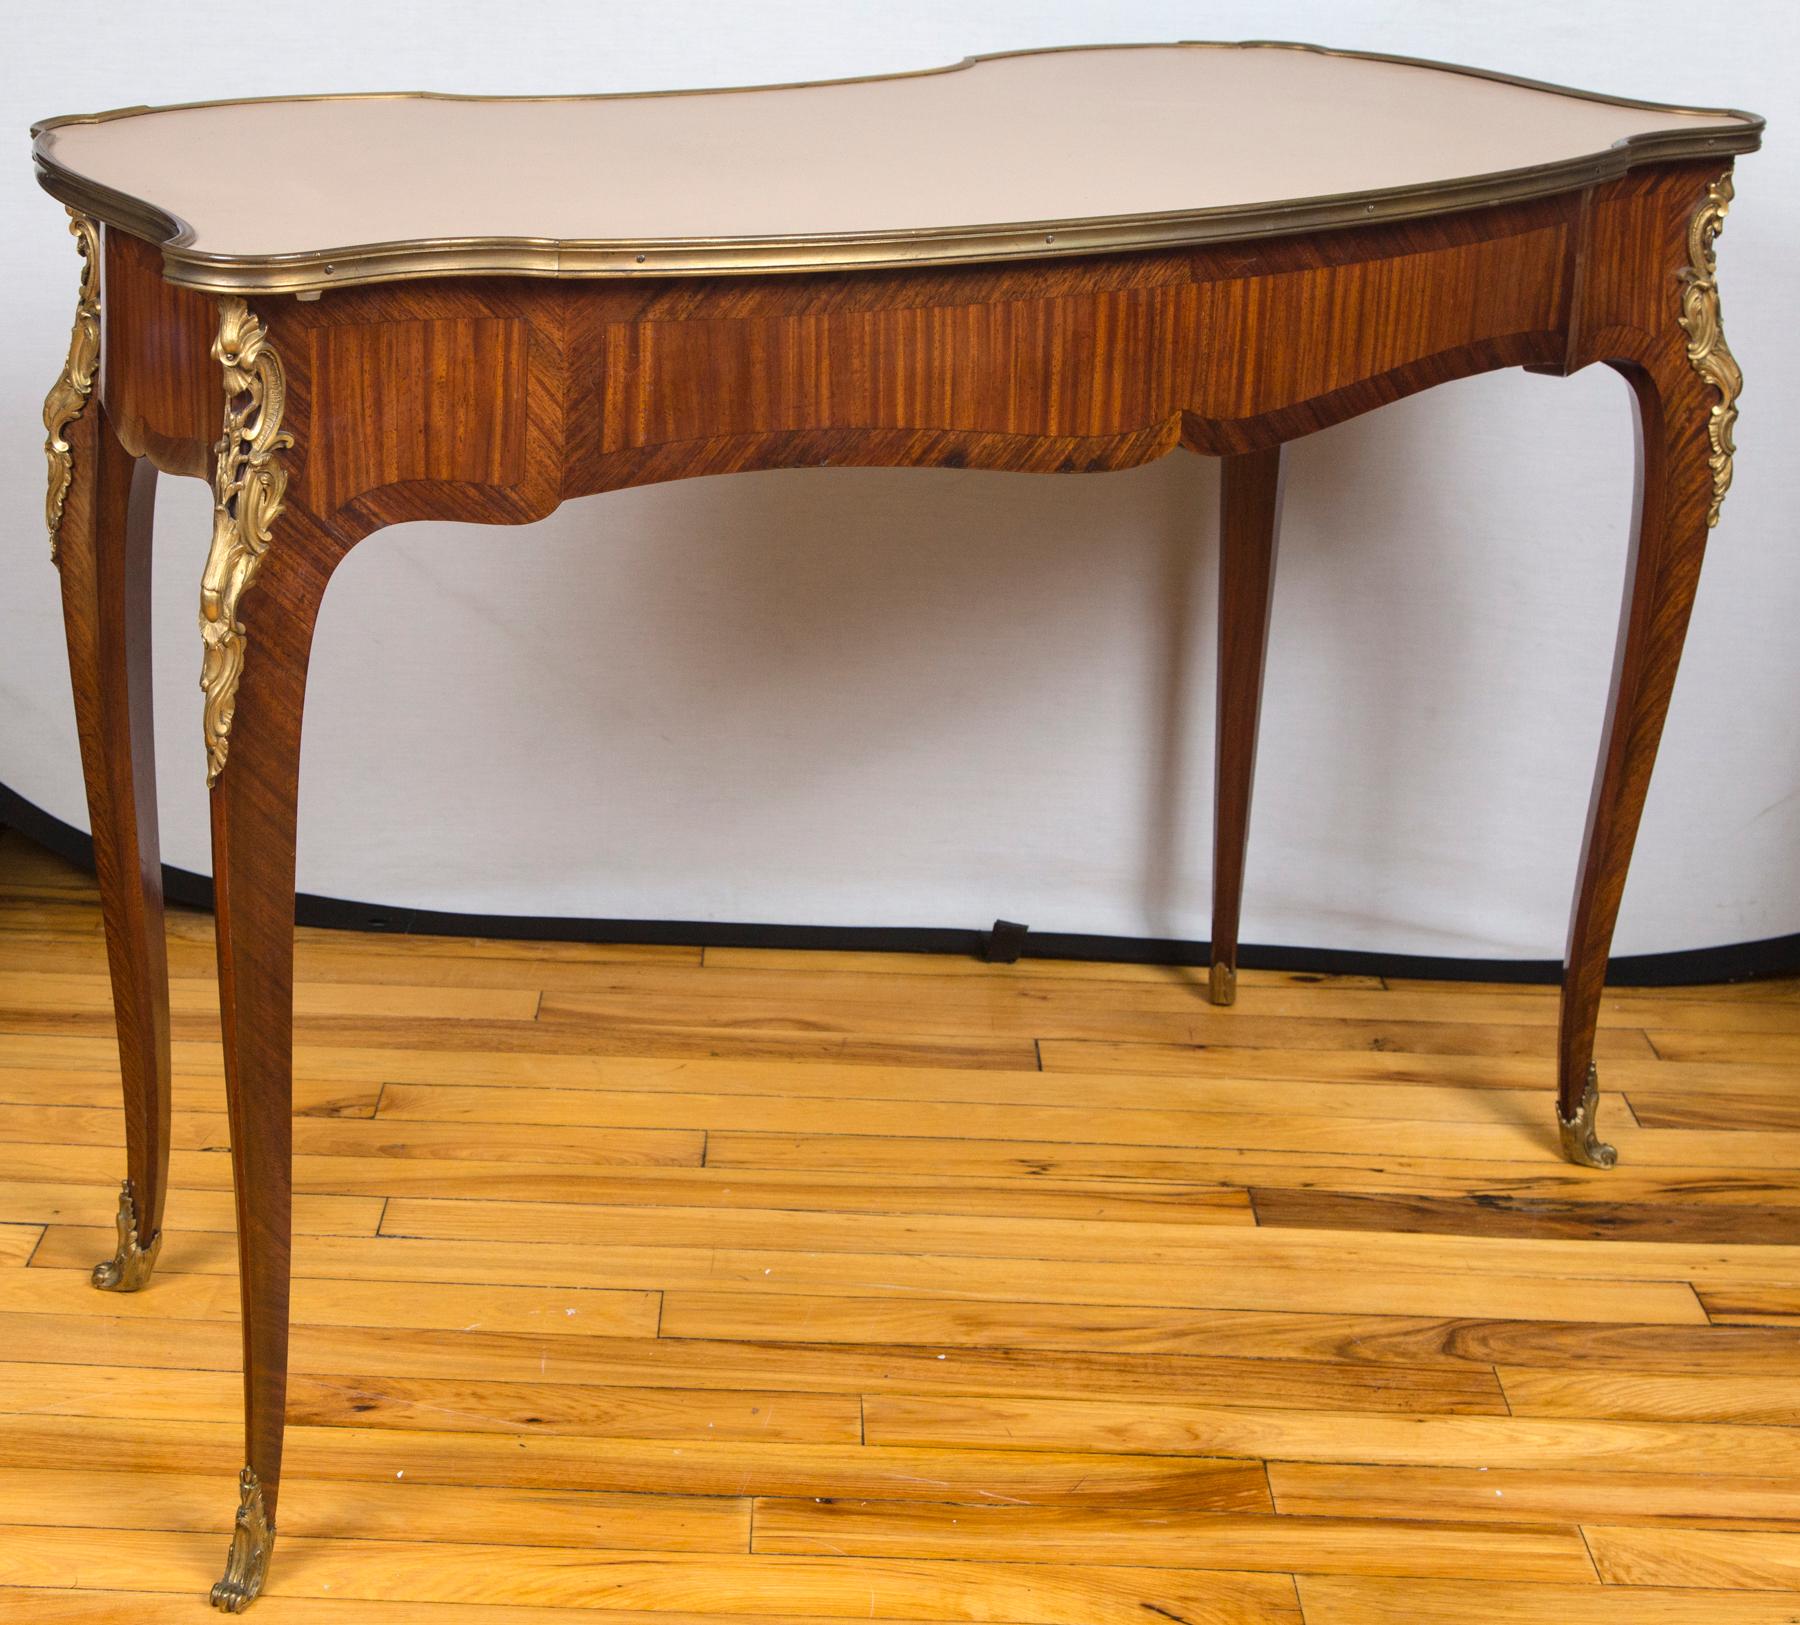 Mid-20th Century Louis XV Style Gilt Bronze-Mounted Bois-Satiné Writing Table For Sale